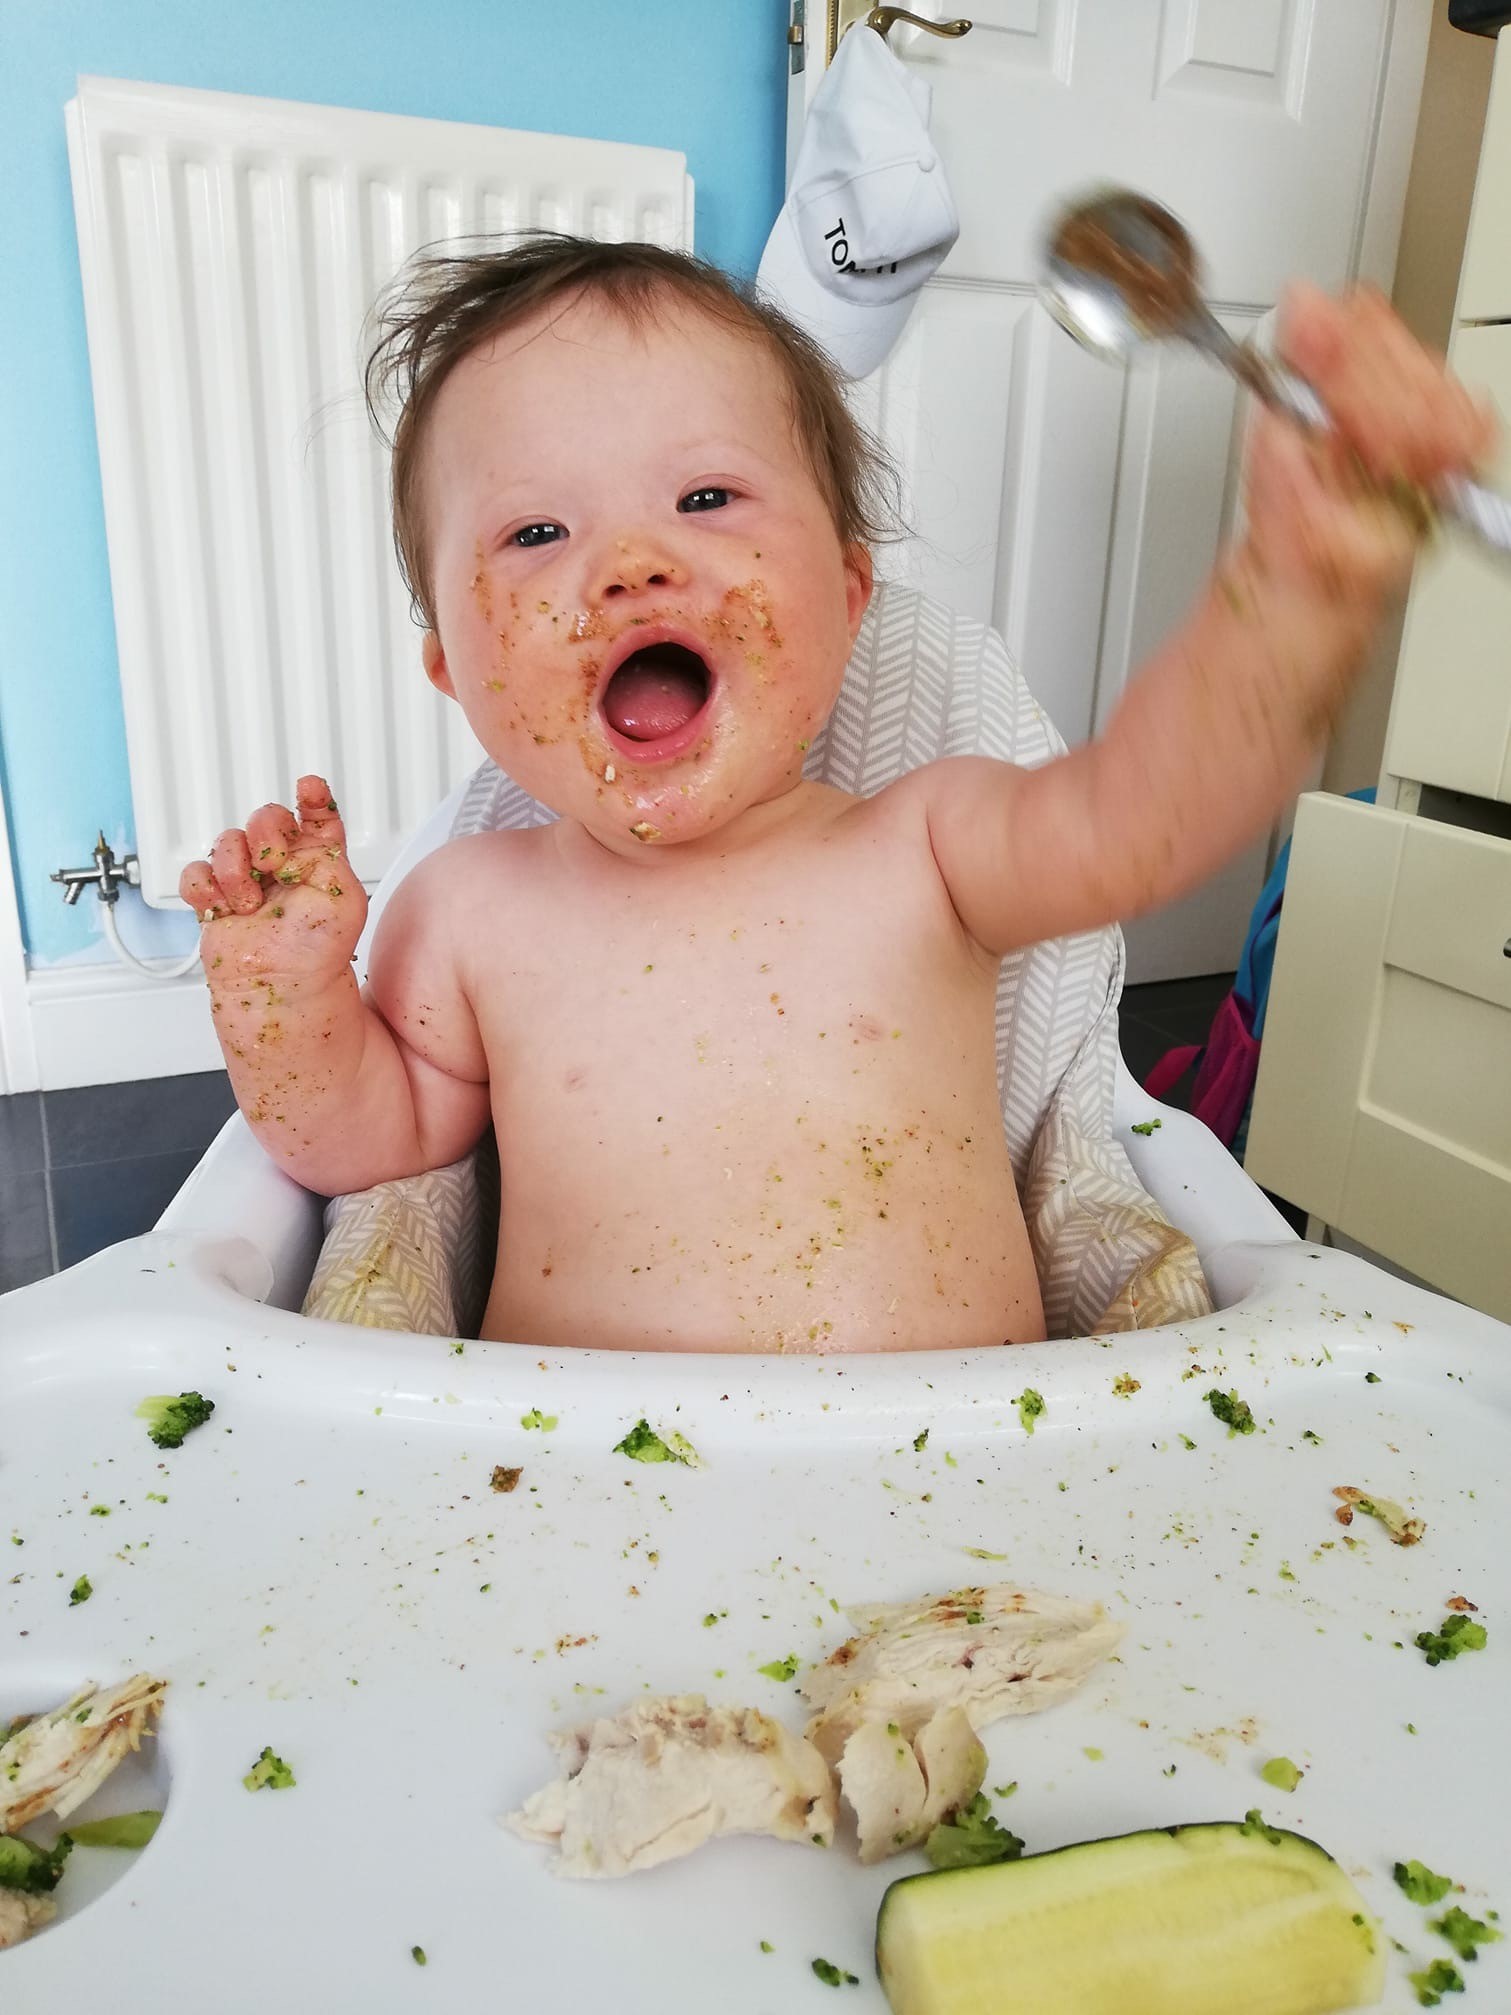 Baby-led weaning: tips to get you | Baby & Feeding articles & support | NCT